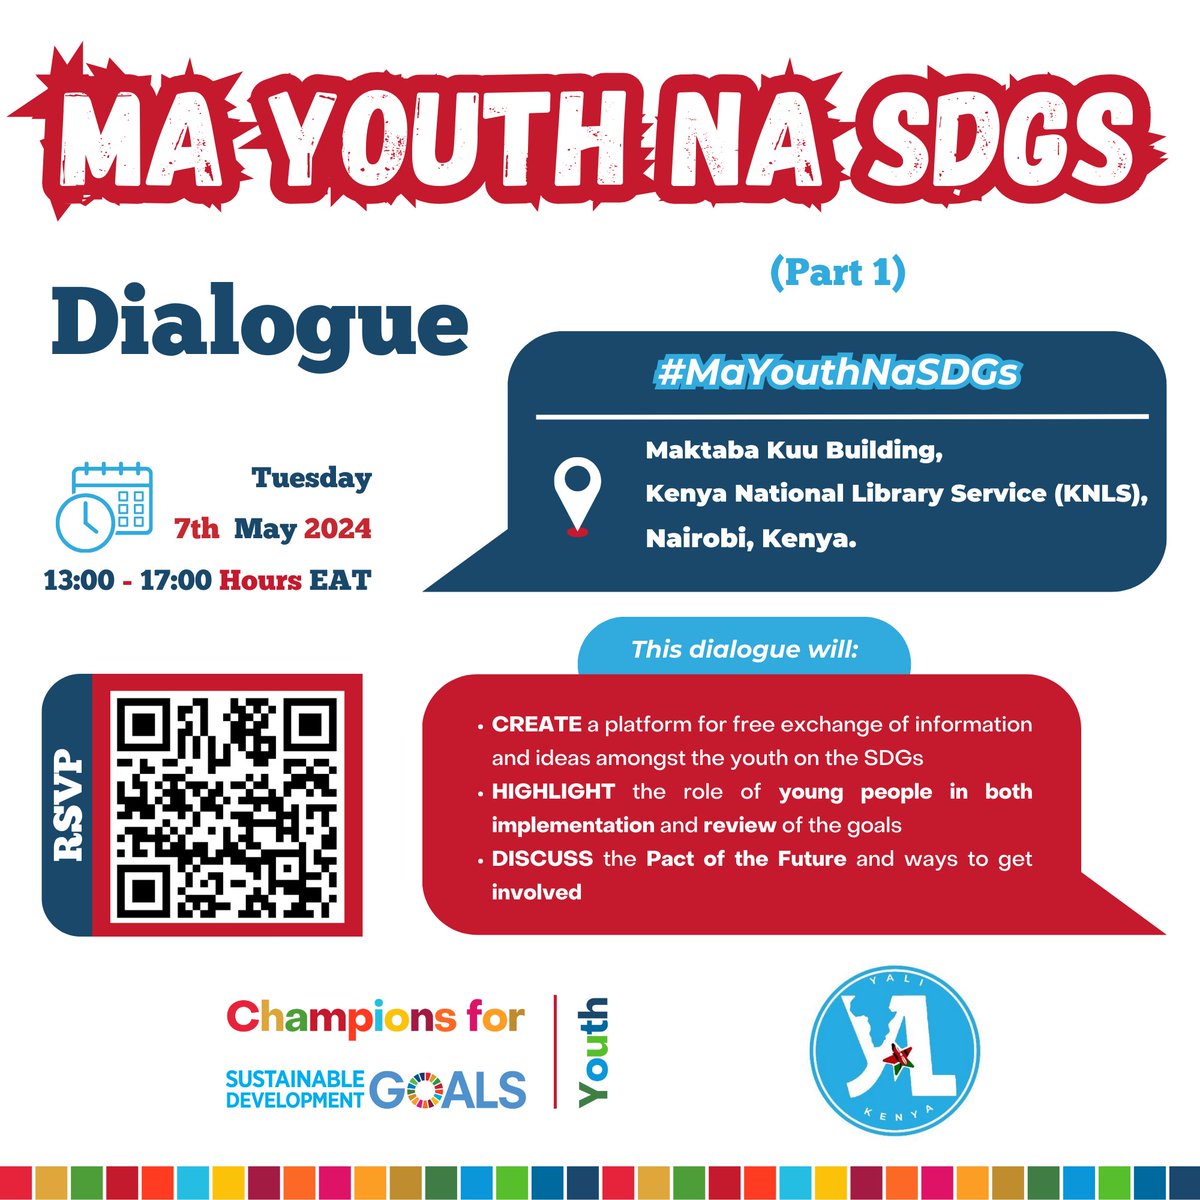 Dear @Champions4SDGs Youth, We are cohosting an interesting #MaYouthNaSDGs Dialogue on Tue, May 7, 2024, from 1-5 PM EAT at Maktaba Kuu Building in Nairobi with @YALIAlumniKe. Register via forms.office.com/r/sX3jL547pq to join & participate. #MaYouthNaSDGs #2024UNCSC #Champions4SDGs